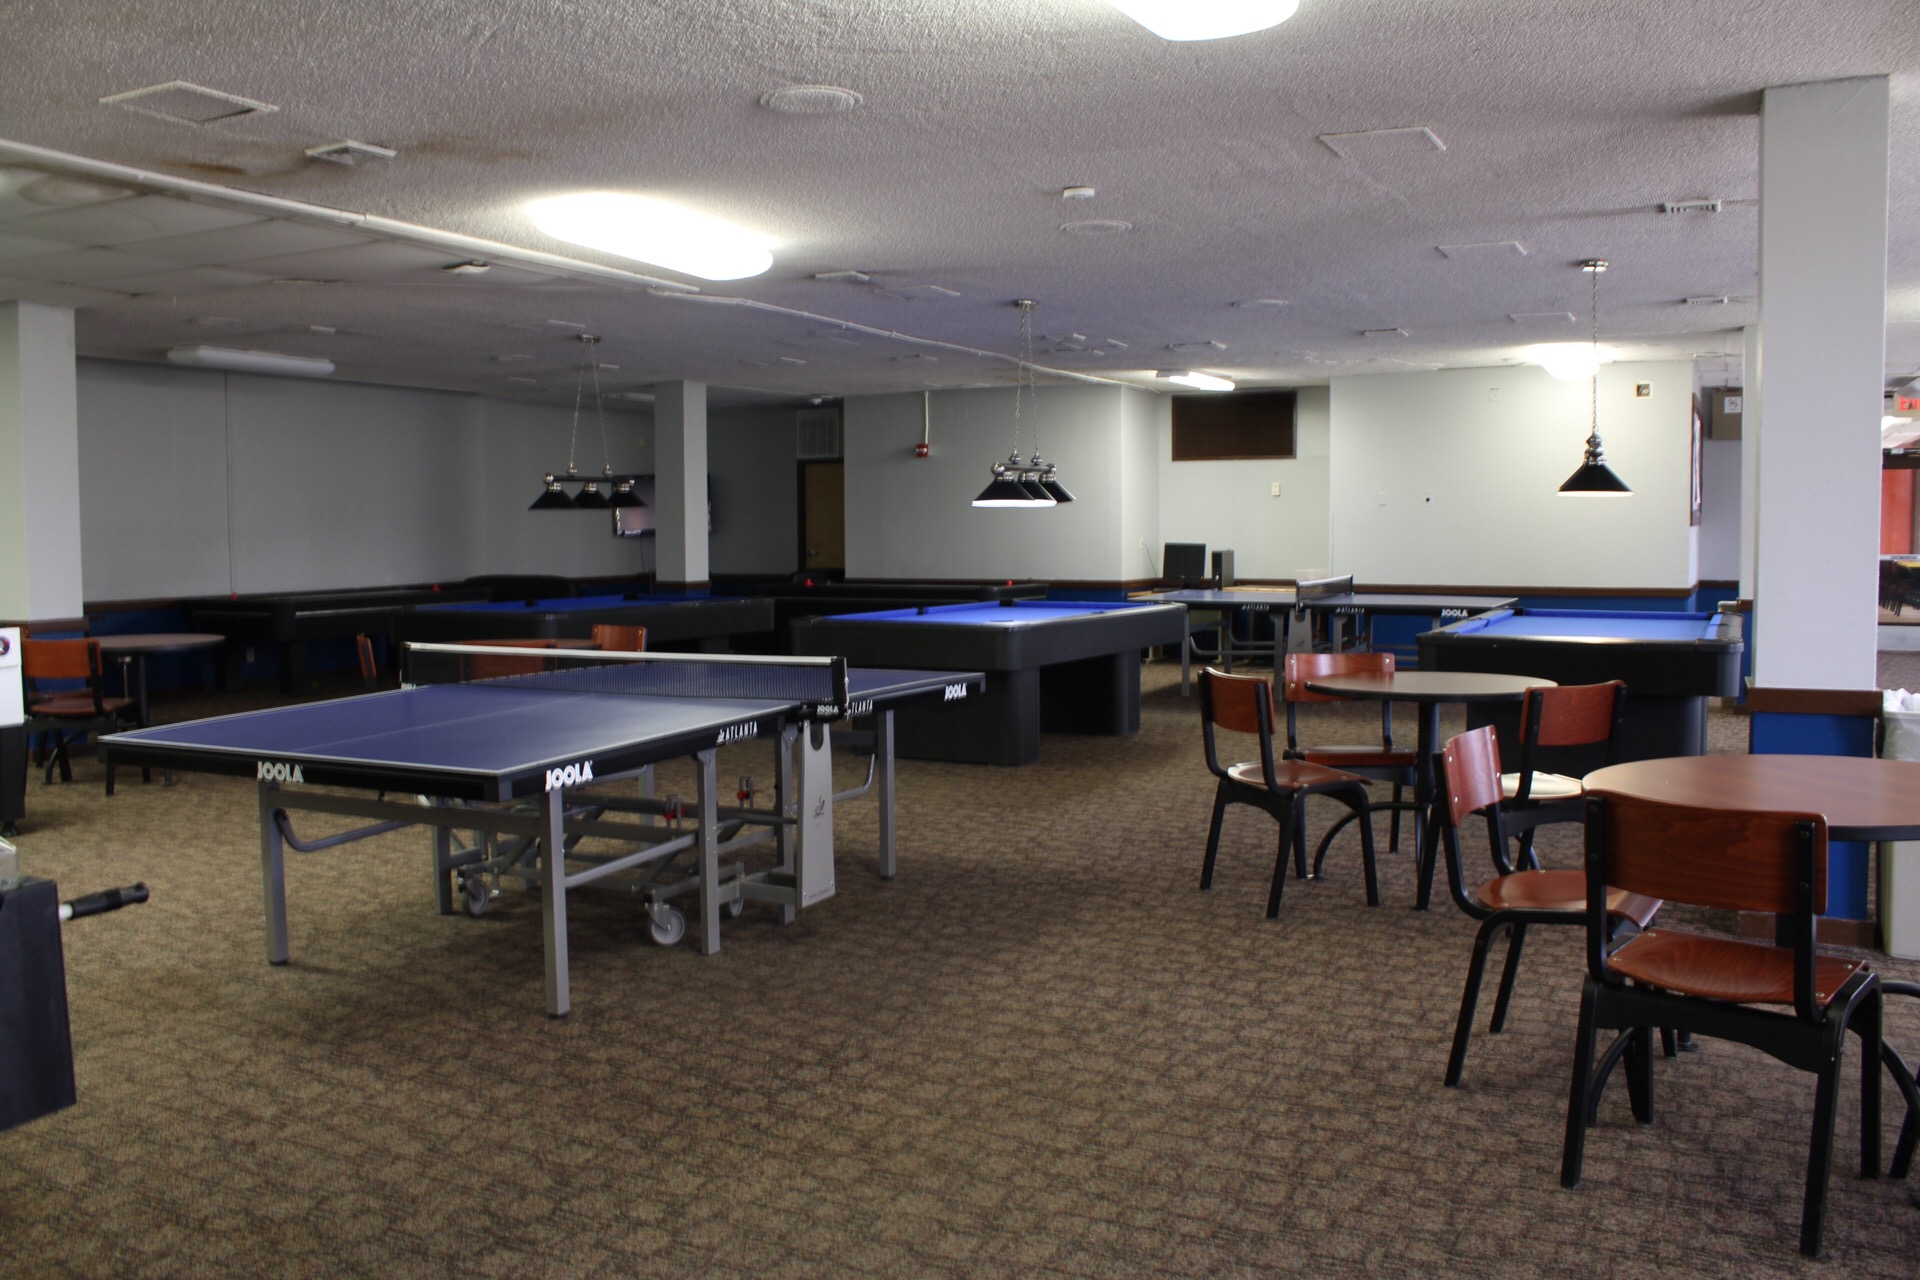 Wider shot of the game room showing 2 ping pong tables, tables and chairs, 3 pool tables, couches and wall mounted tv's.